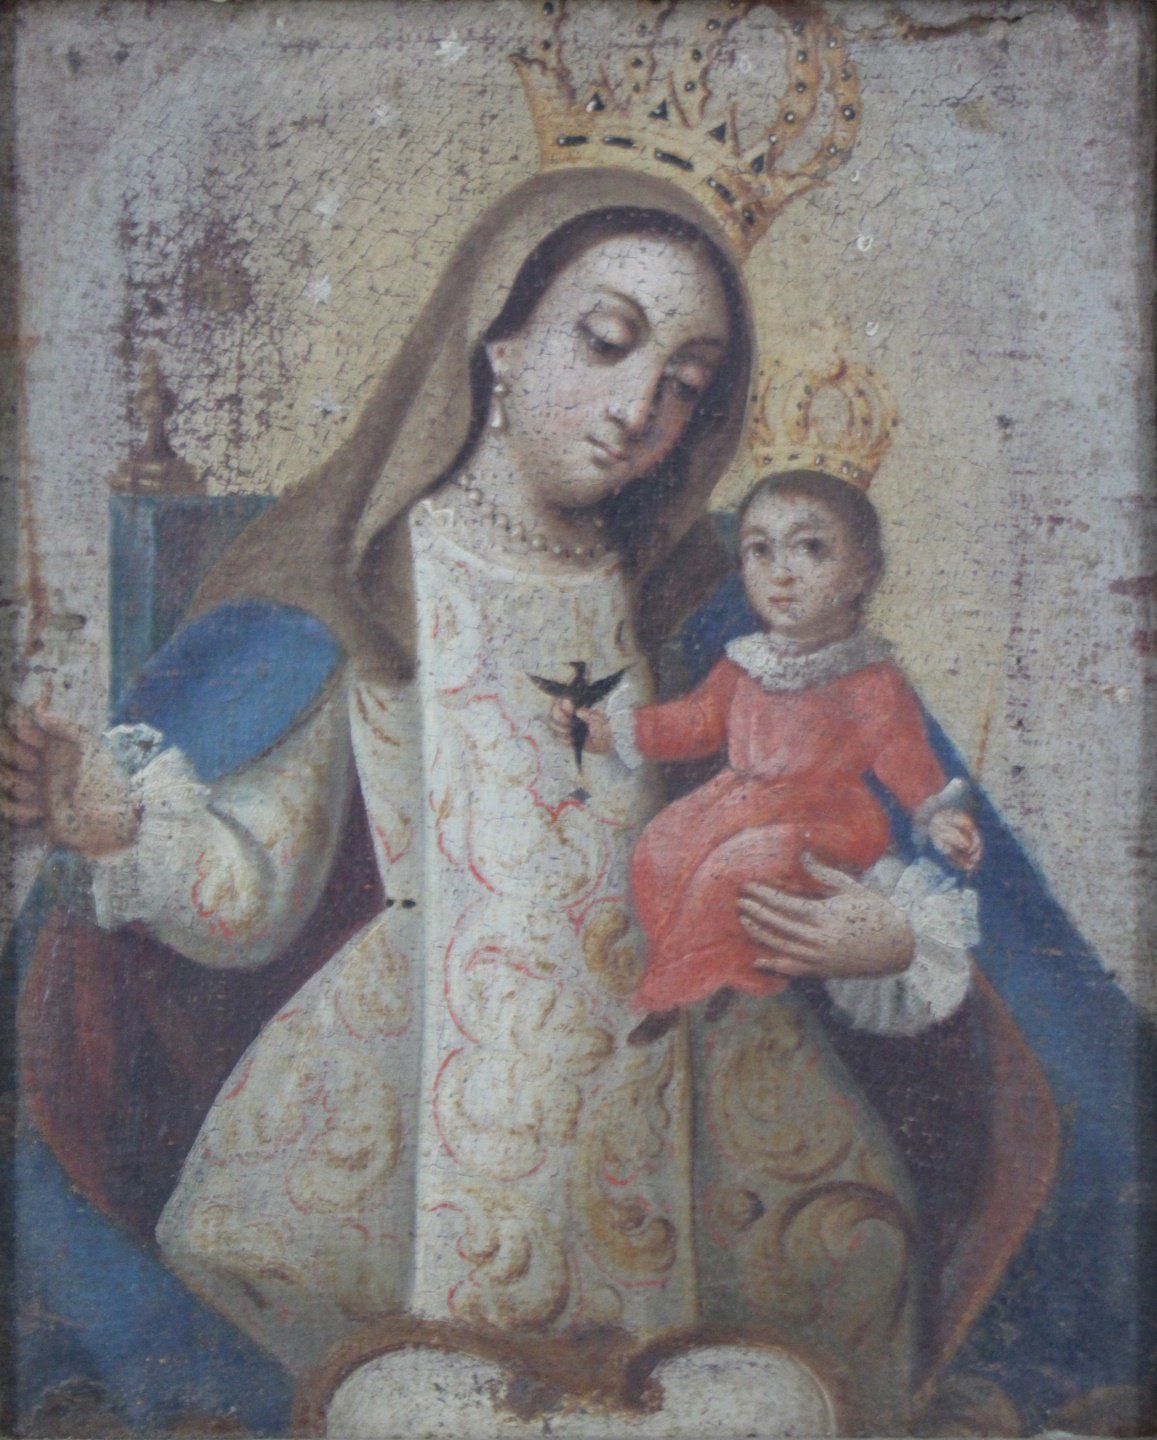 UNSIGNED. MADONNA AND CHILD. Oil